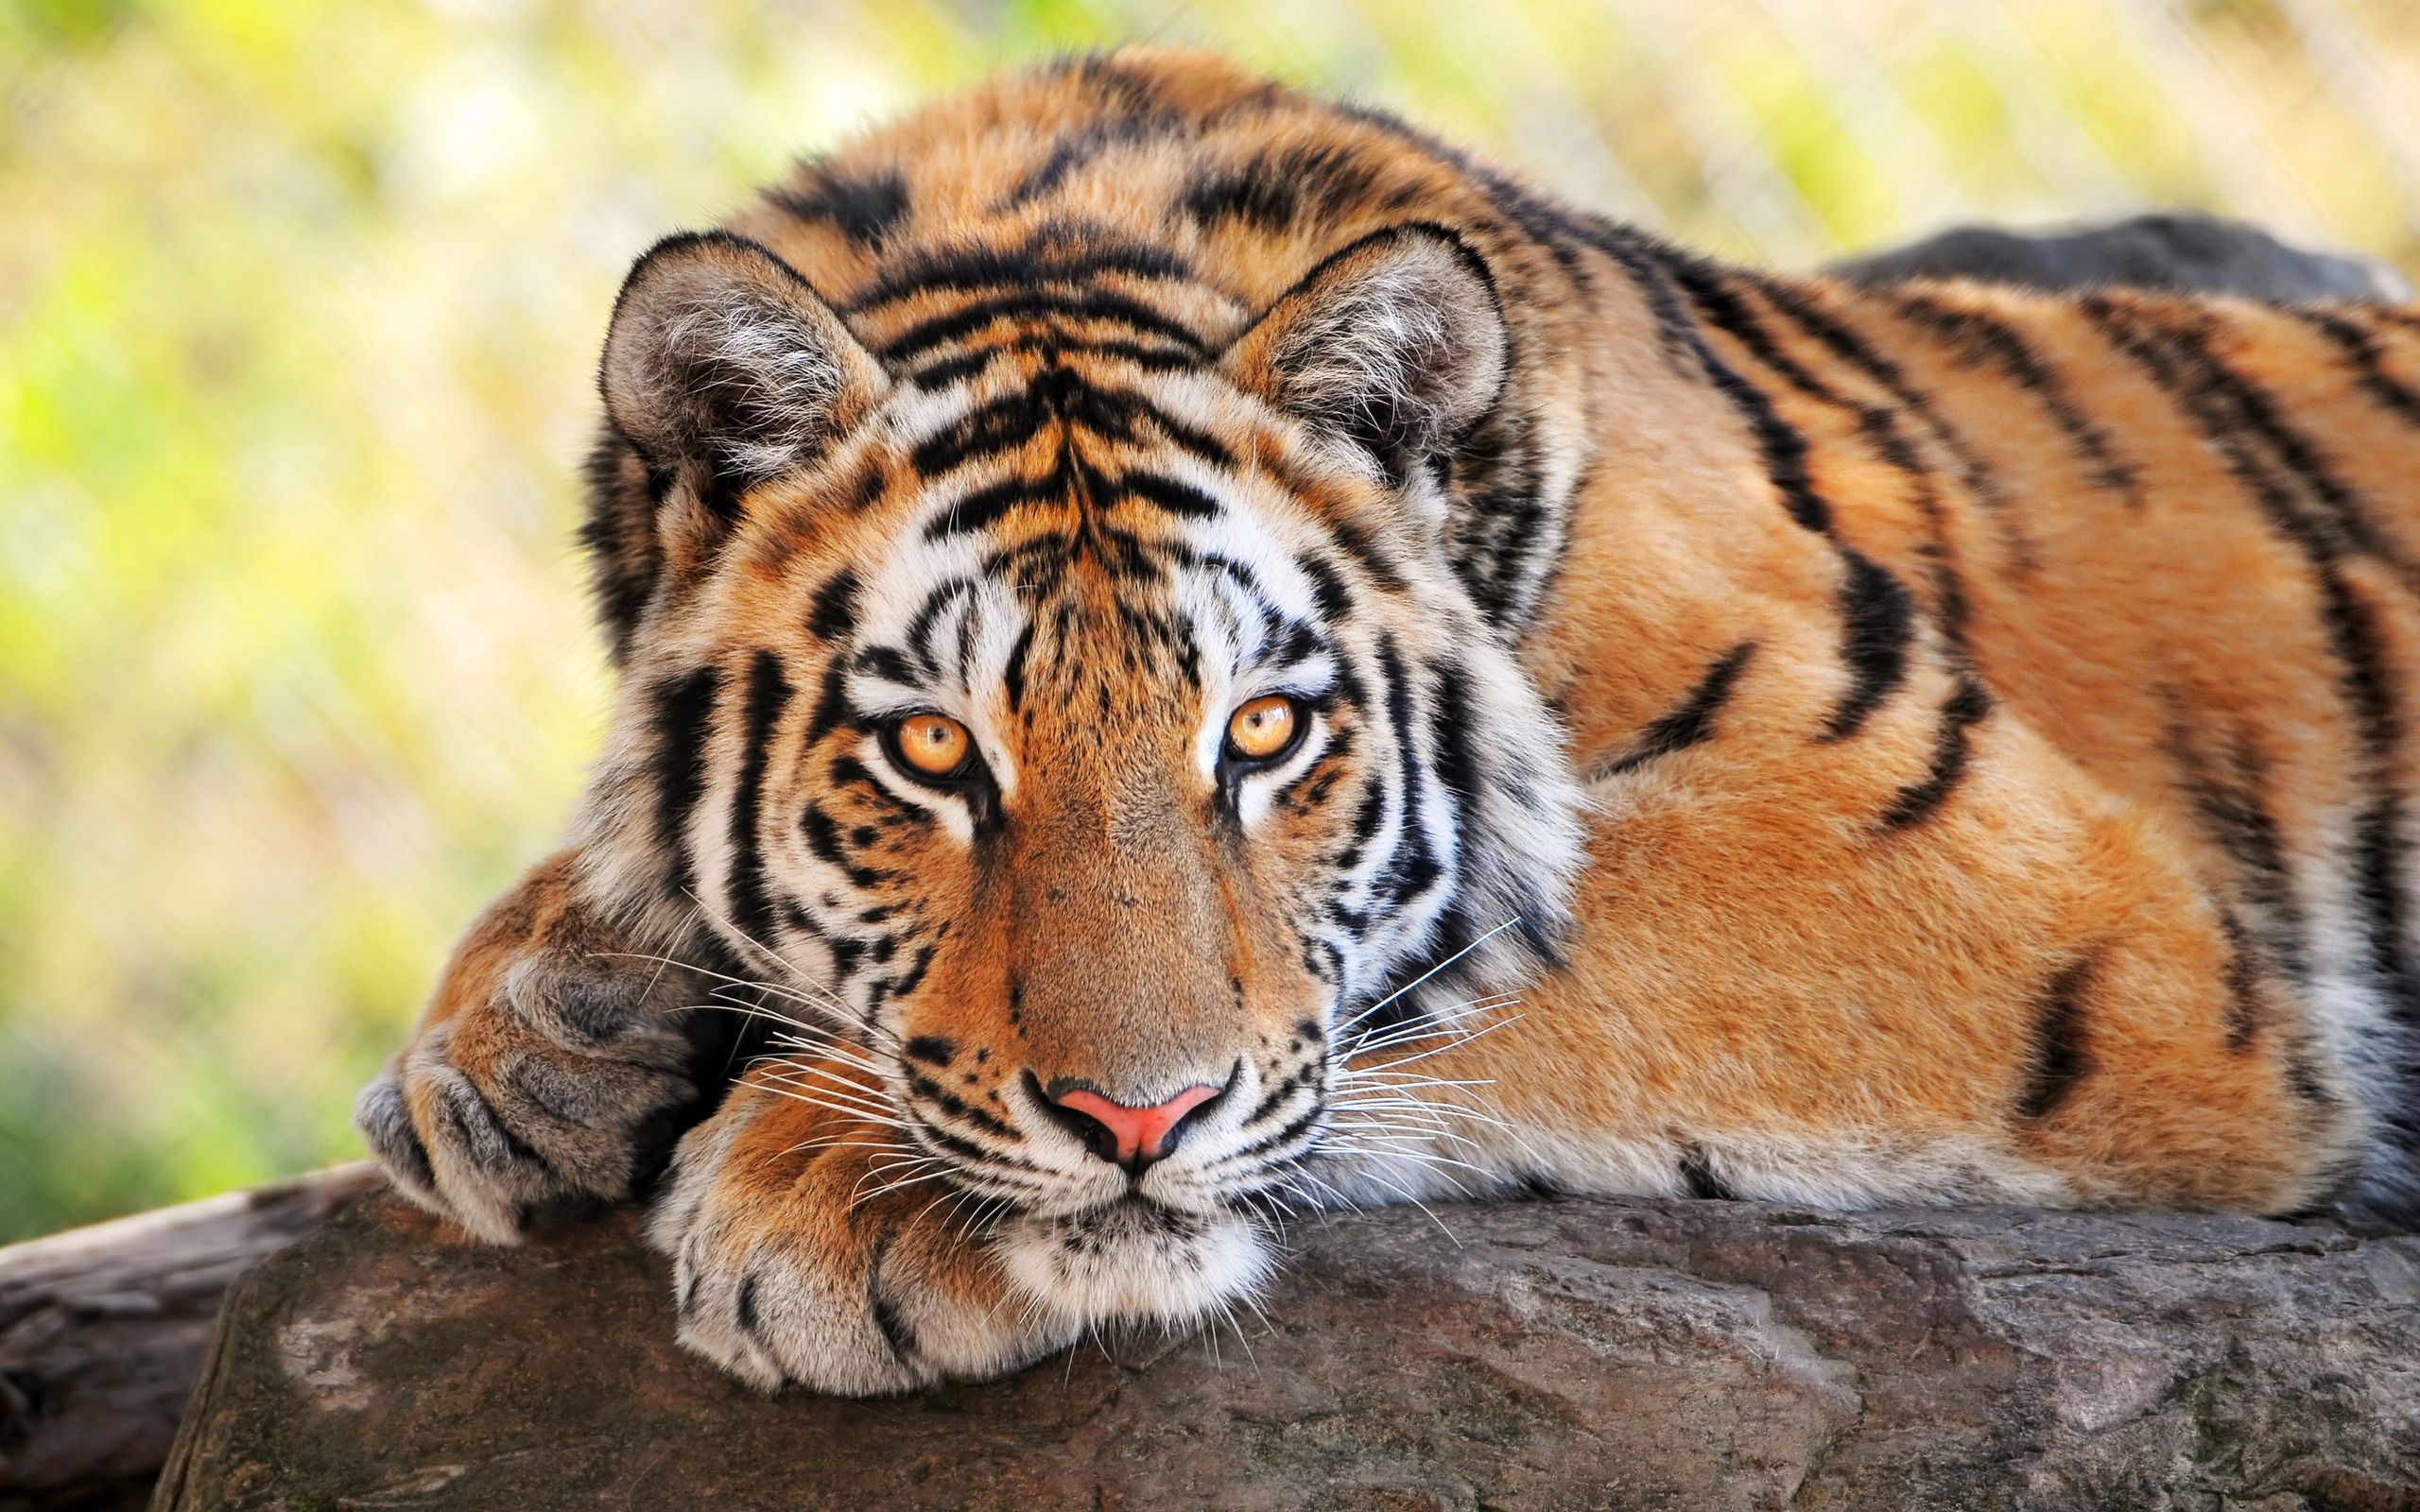 Tiger eye wallpapers and images - wallpapers, pictures, photos